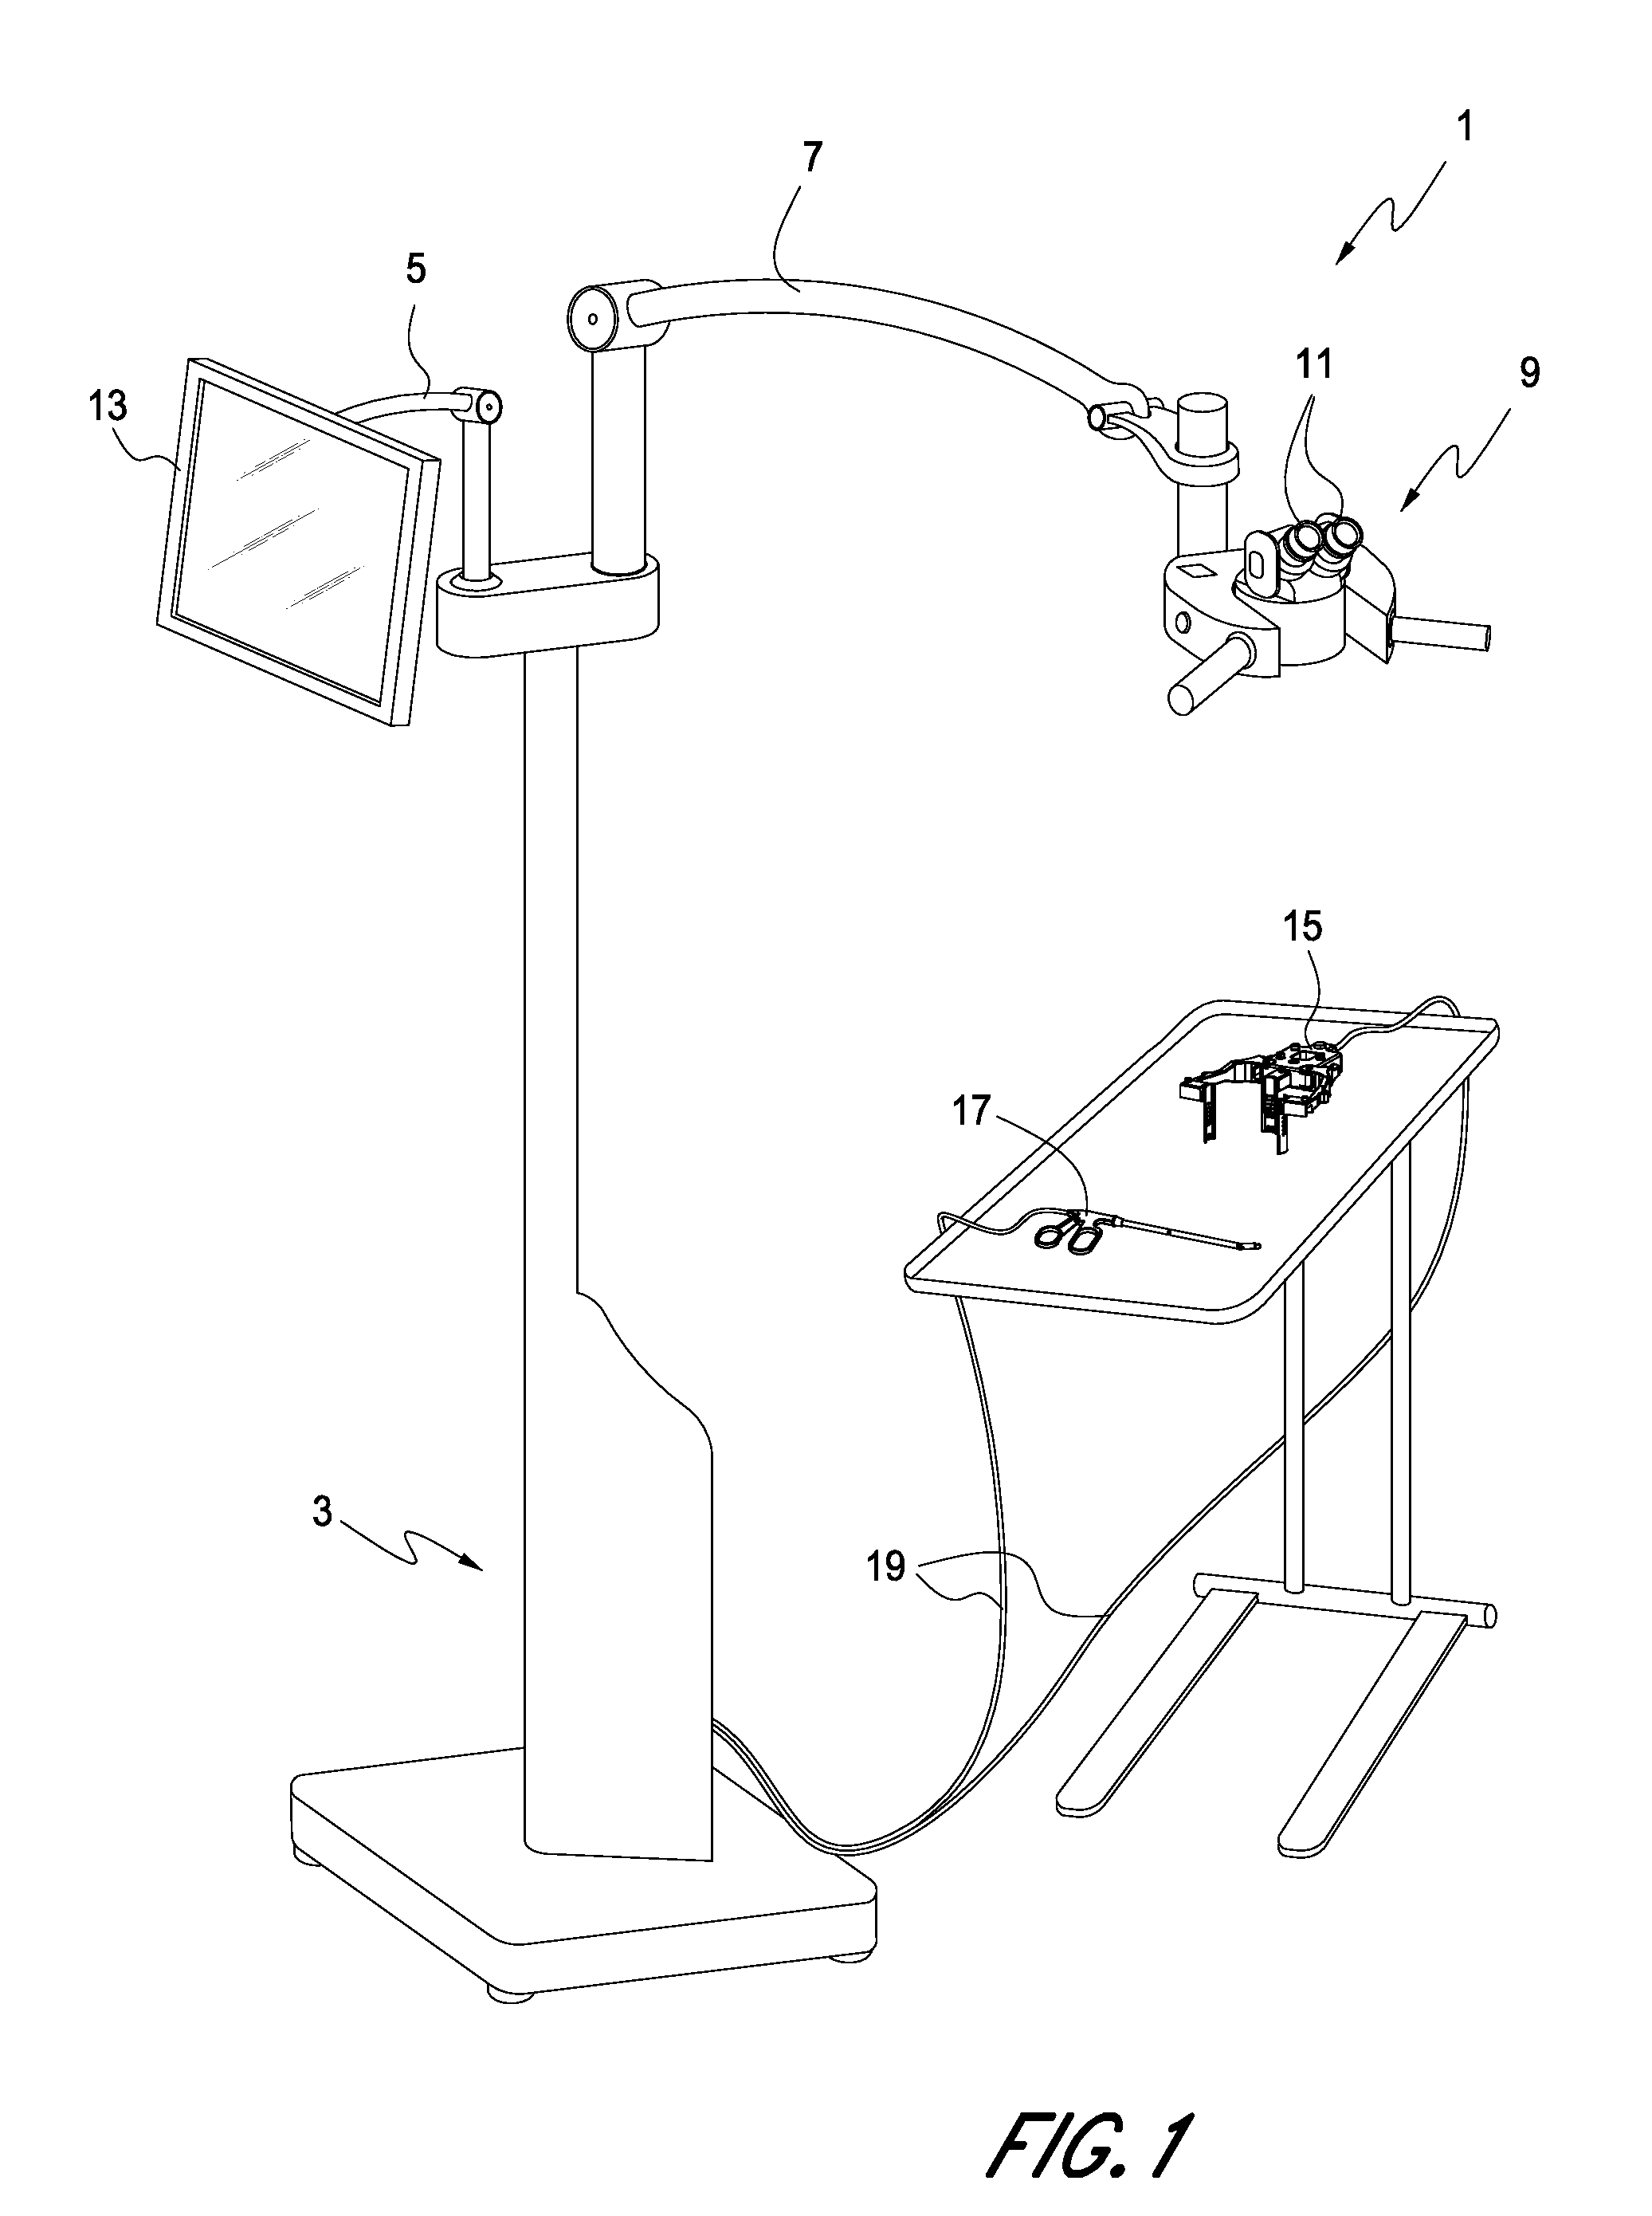 Optical assembly providing a surgical microscope view for a surgical visualization system